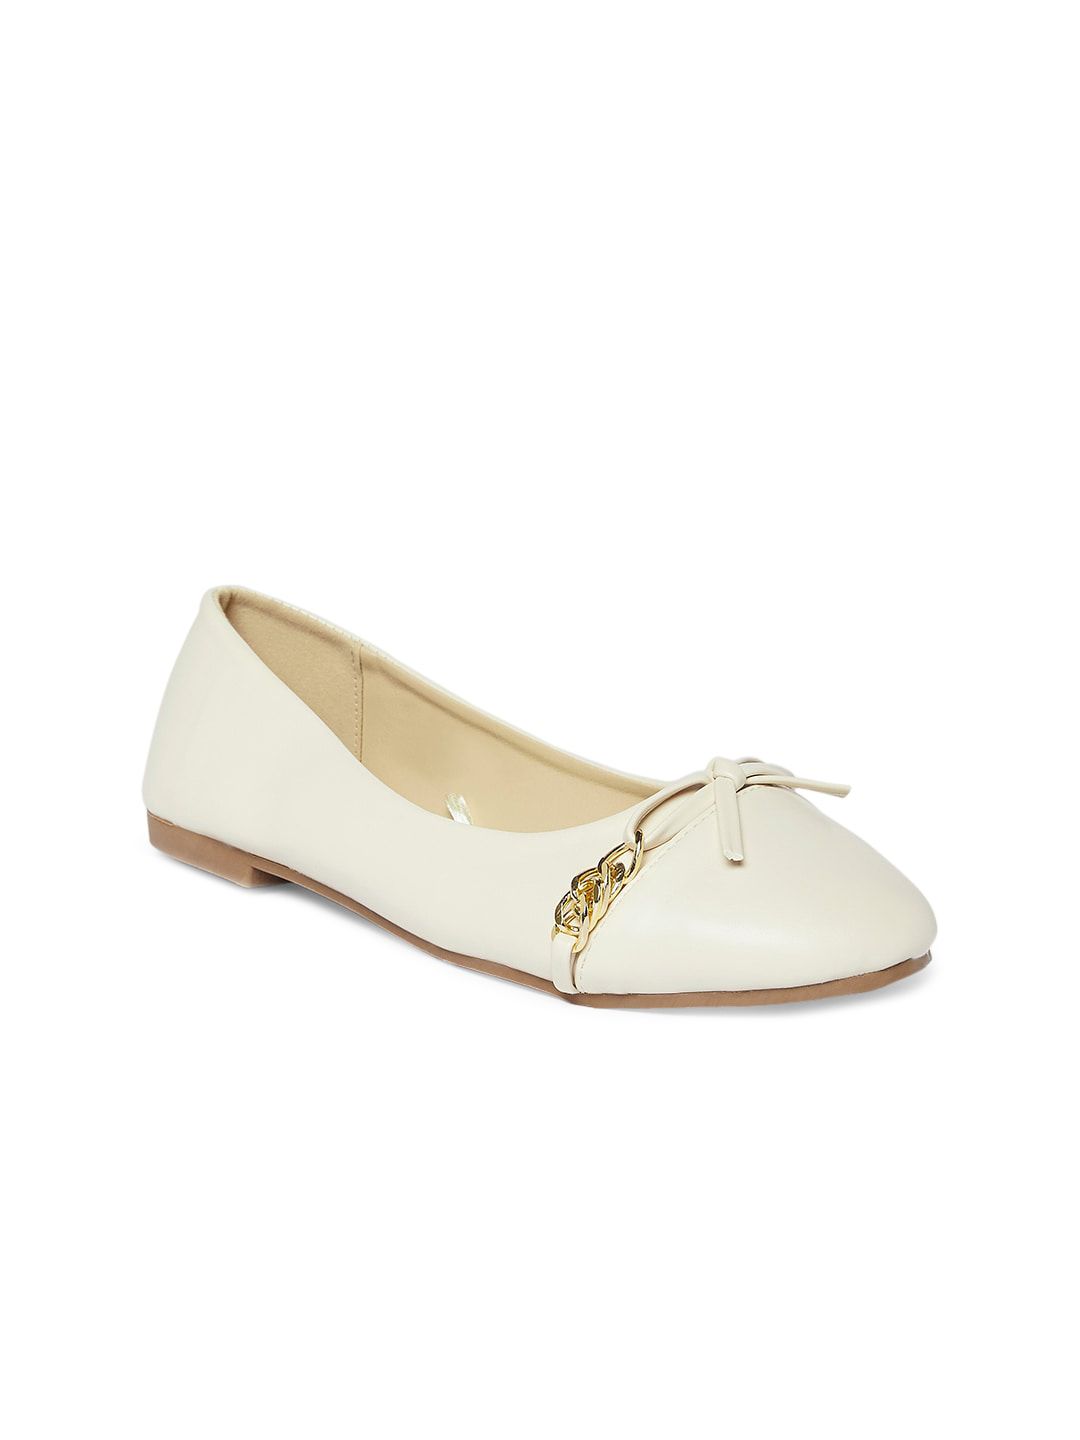 Forever Glam by Pantaloons Women Off White Ballerinas with Bows Flats Price in India